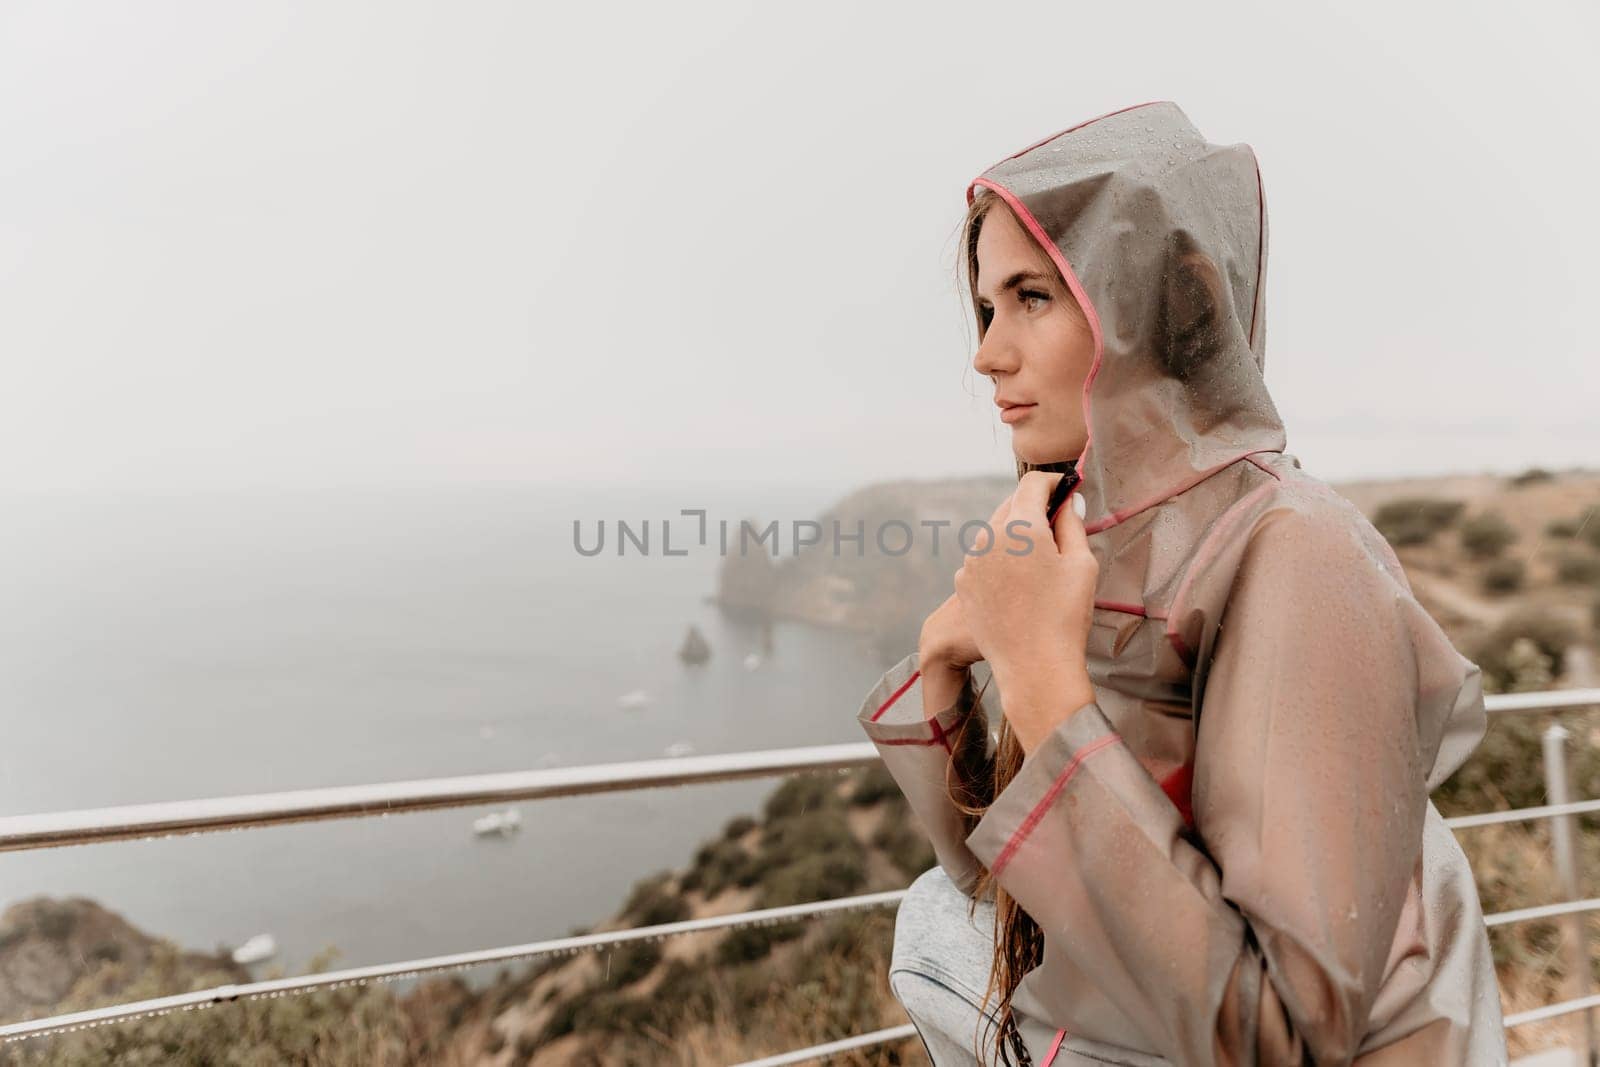 Woman rain park. Happy woman portrait wearing a raincoat with transparent umbrella outdoors on rainy day in park near sea. Girl on the nature on rainy overcast day